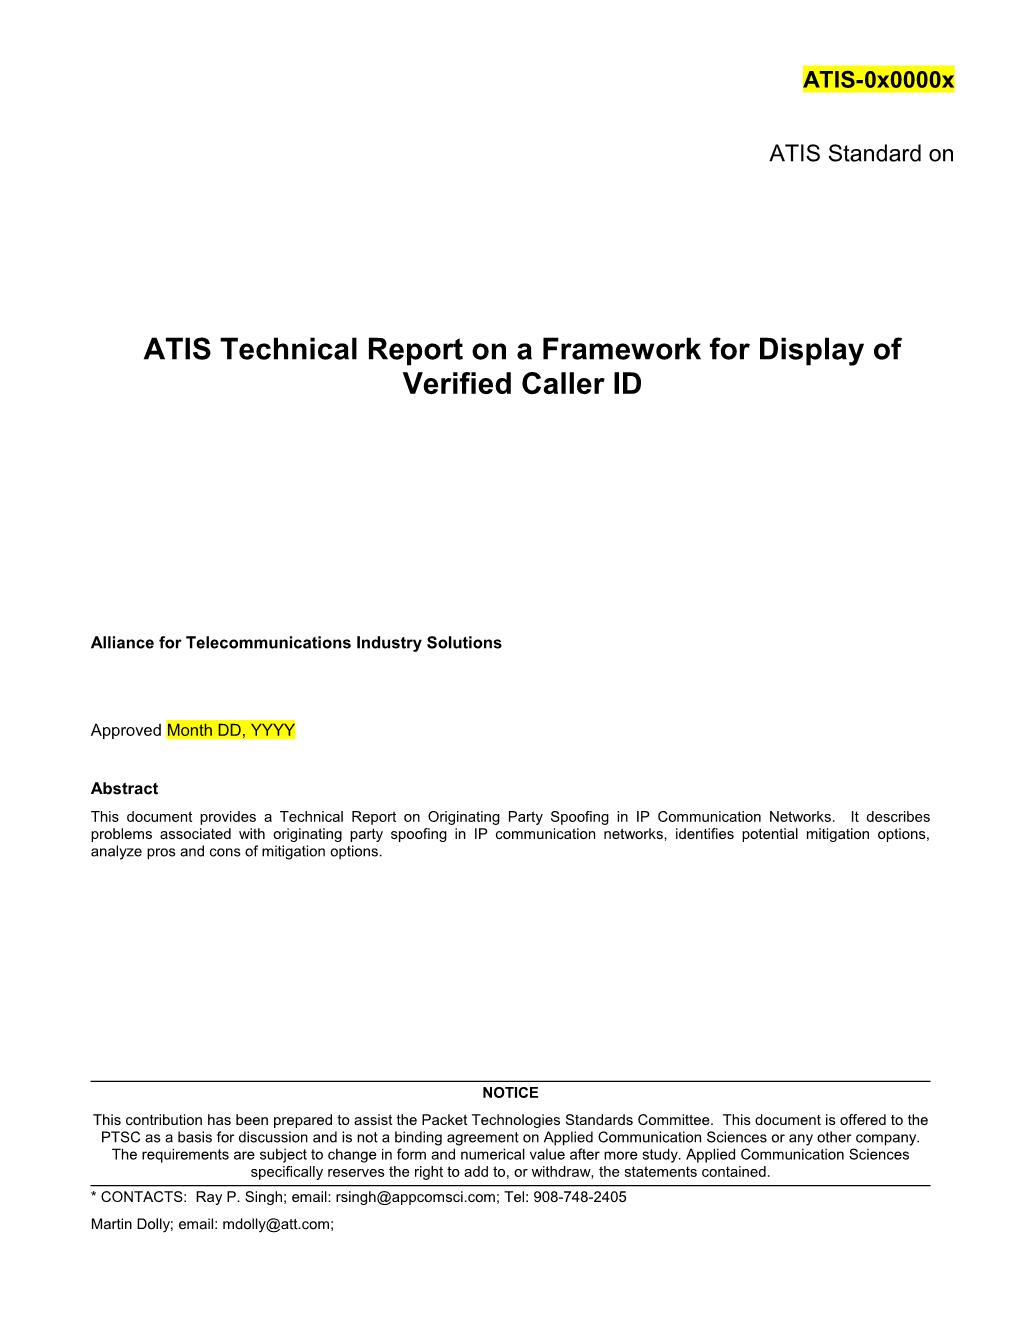 ATIS Technical Report on a Framework for Display of Verified Caller ID